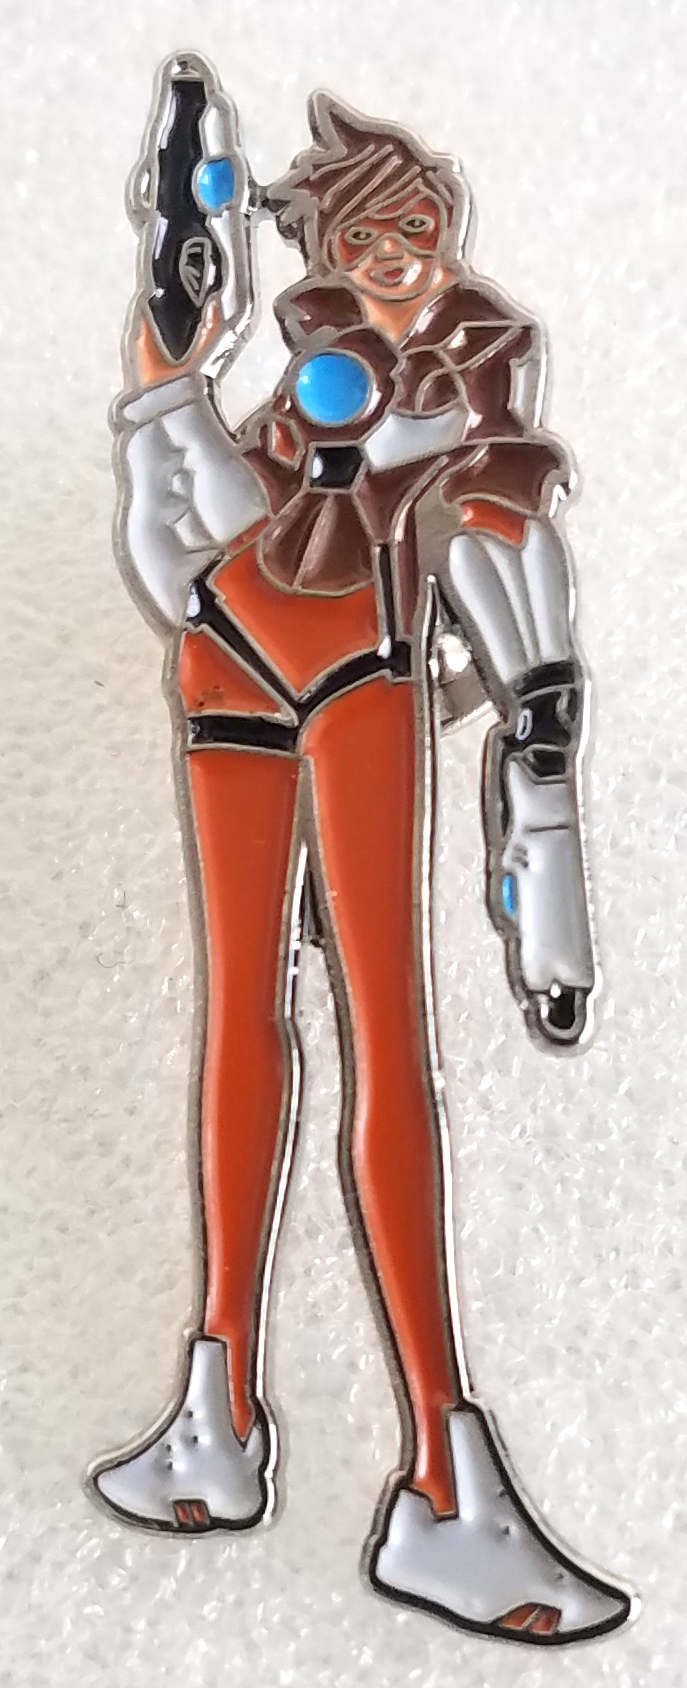 Overwatch 3-Inch Collectible Enamel FiGPiN Wave 1 - Tracer